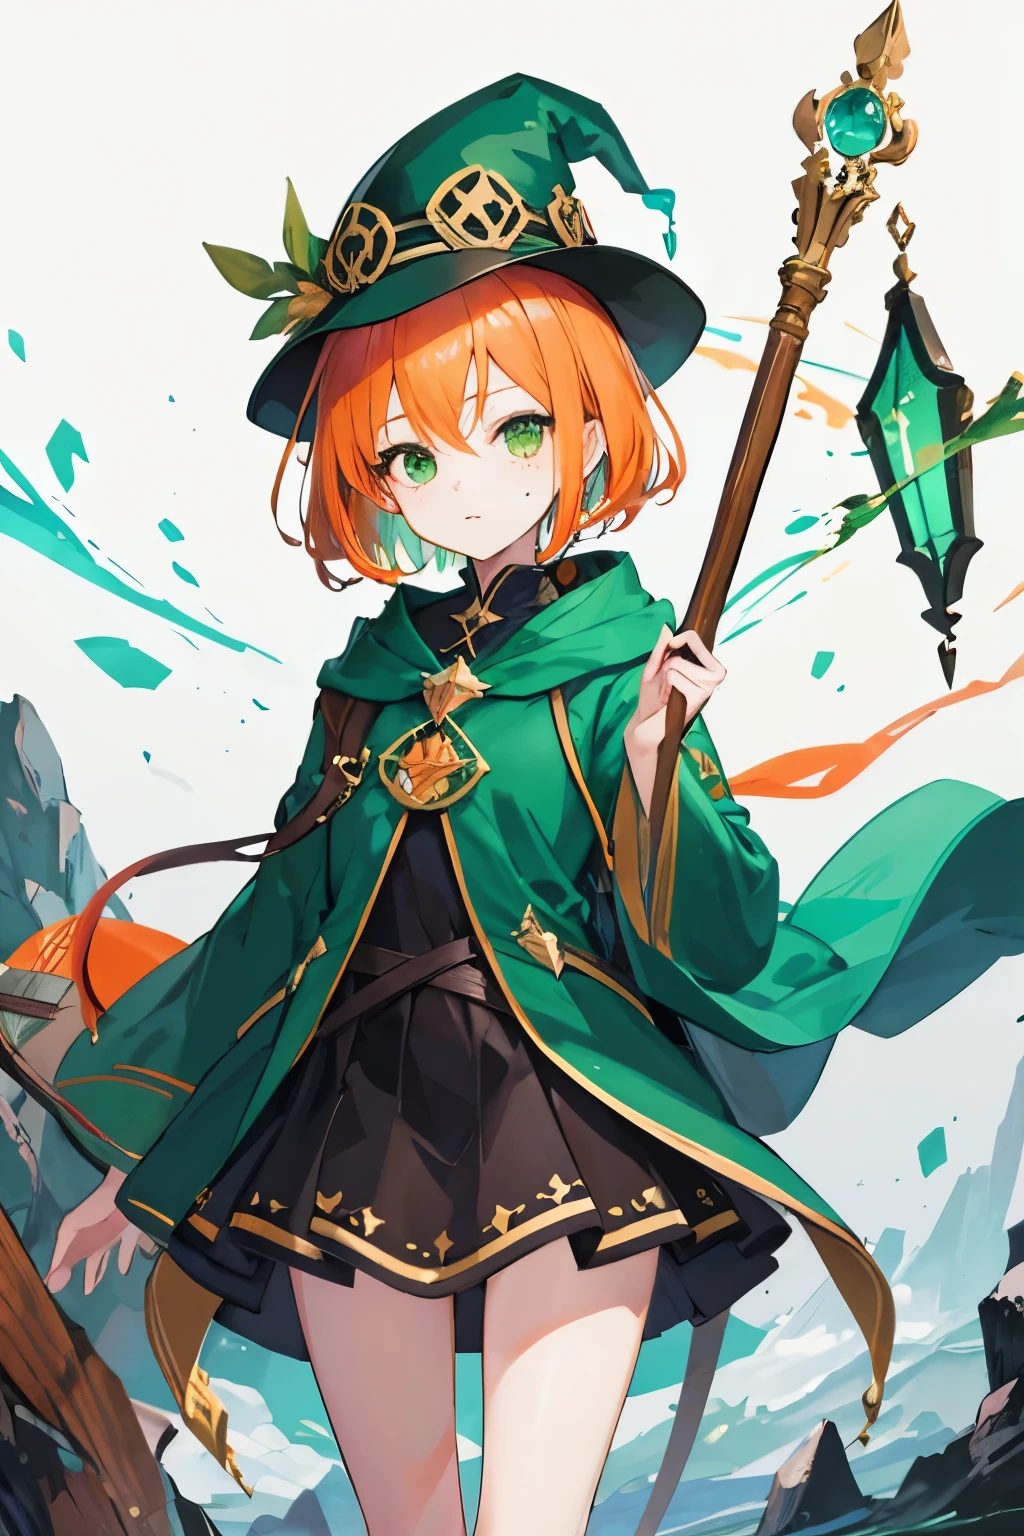 high quality, anime girl mage, with short orange hair, freckles, green eyes, green pointy hat, green robe, wooden staff


